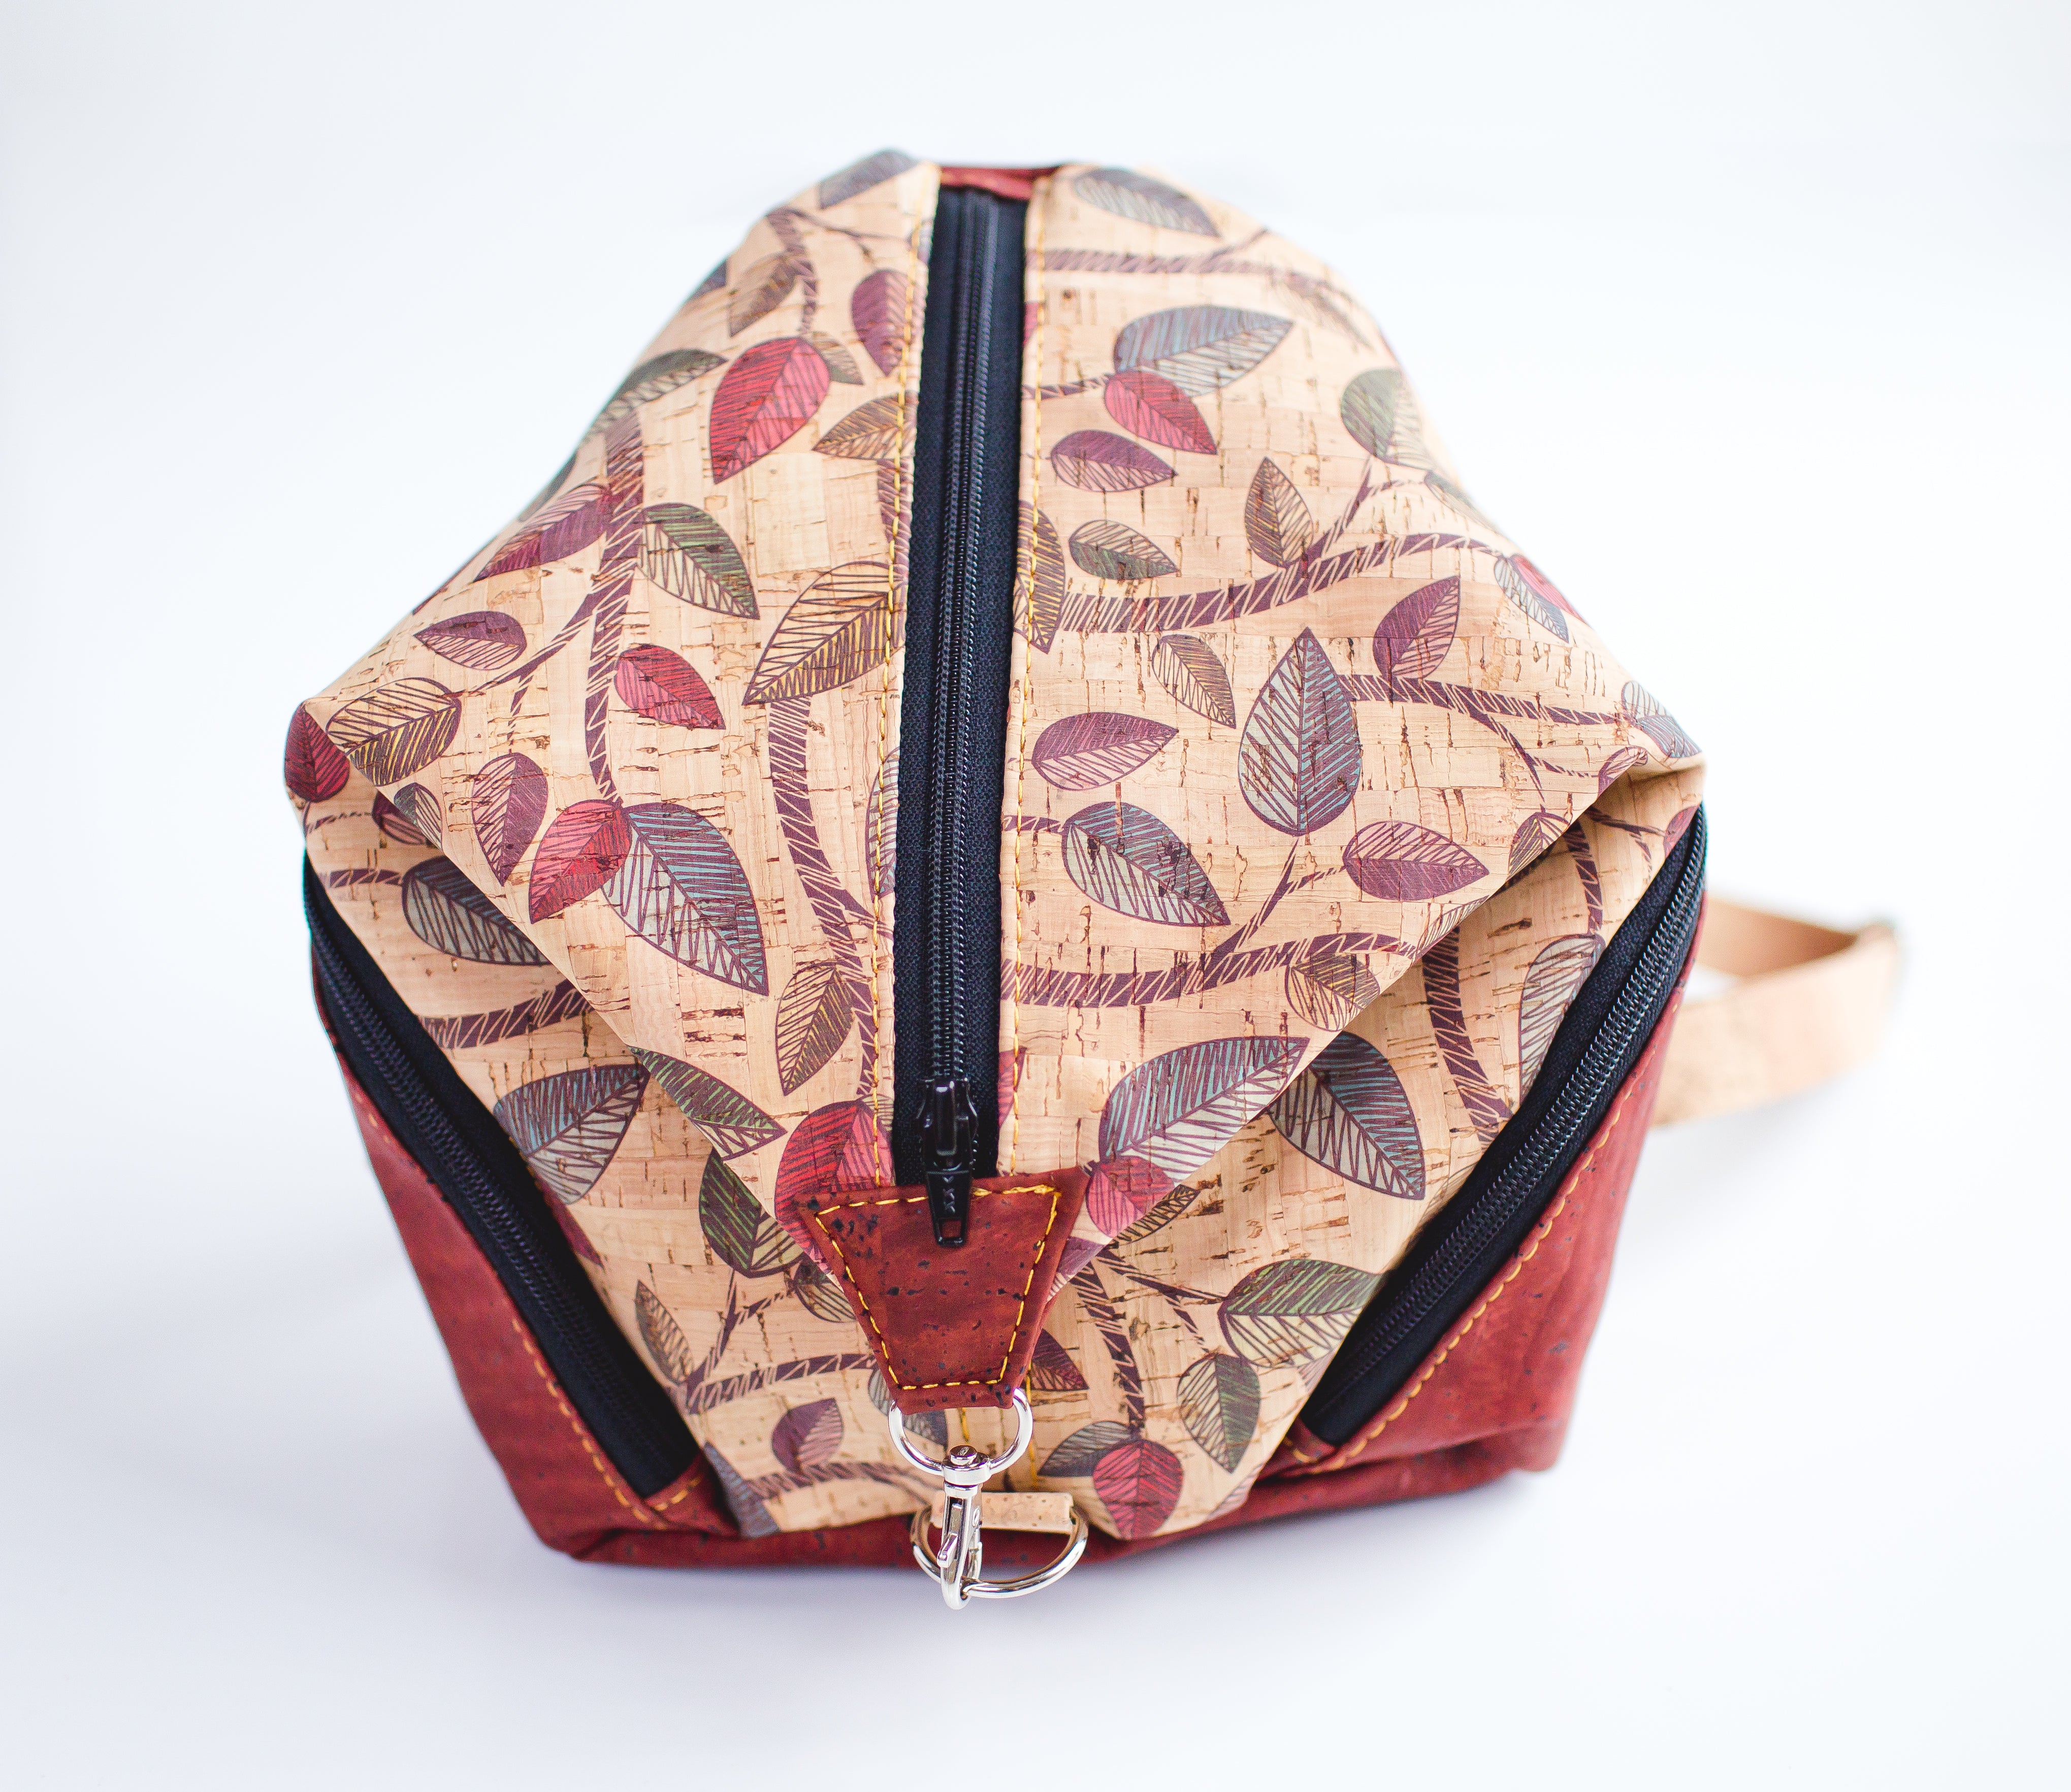 G2-Mini Wesley Backpack in Red Leaf and Solid Brick - All Cork Backpack Purse